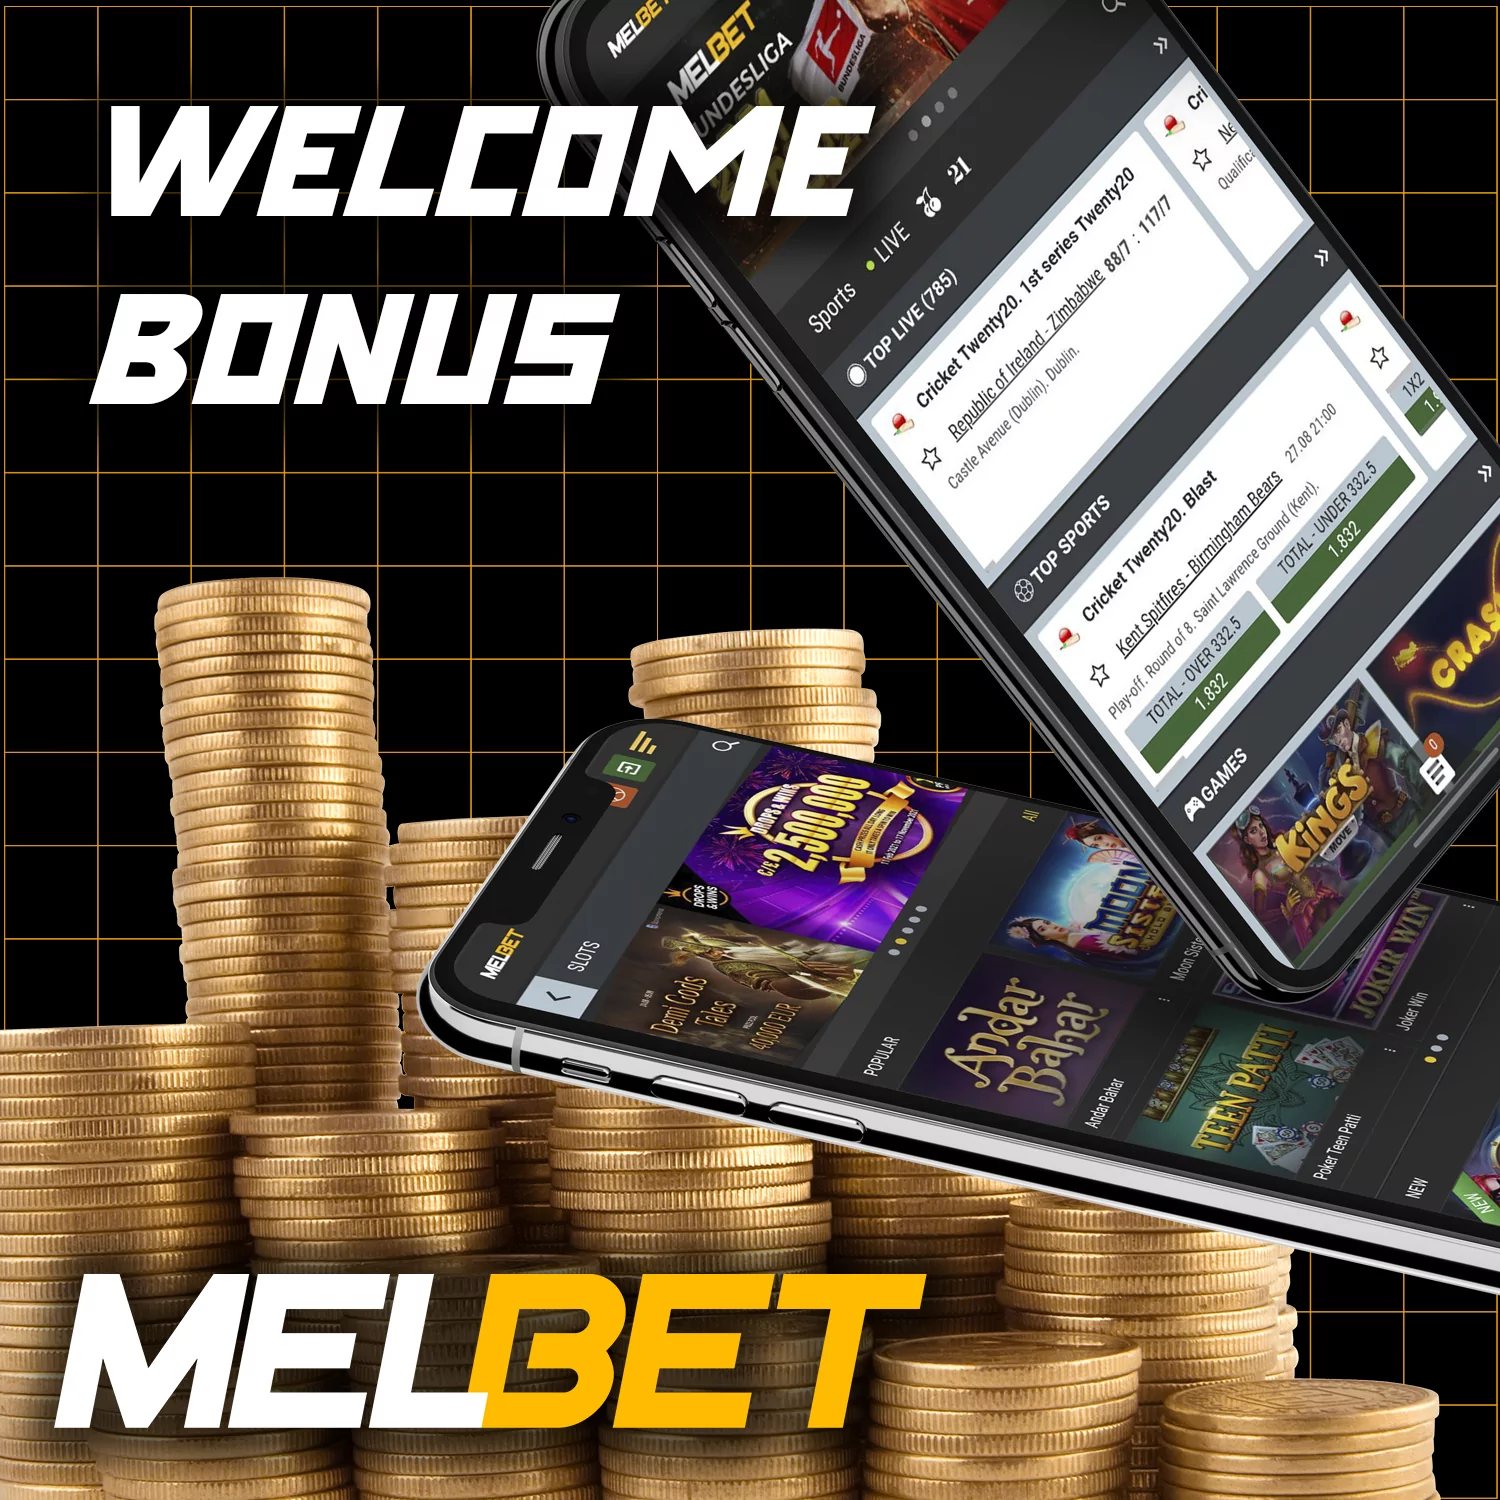 Sign up for an account at Melbet and get a welcome bonus of INR 8,000.